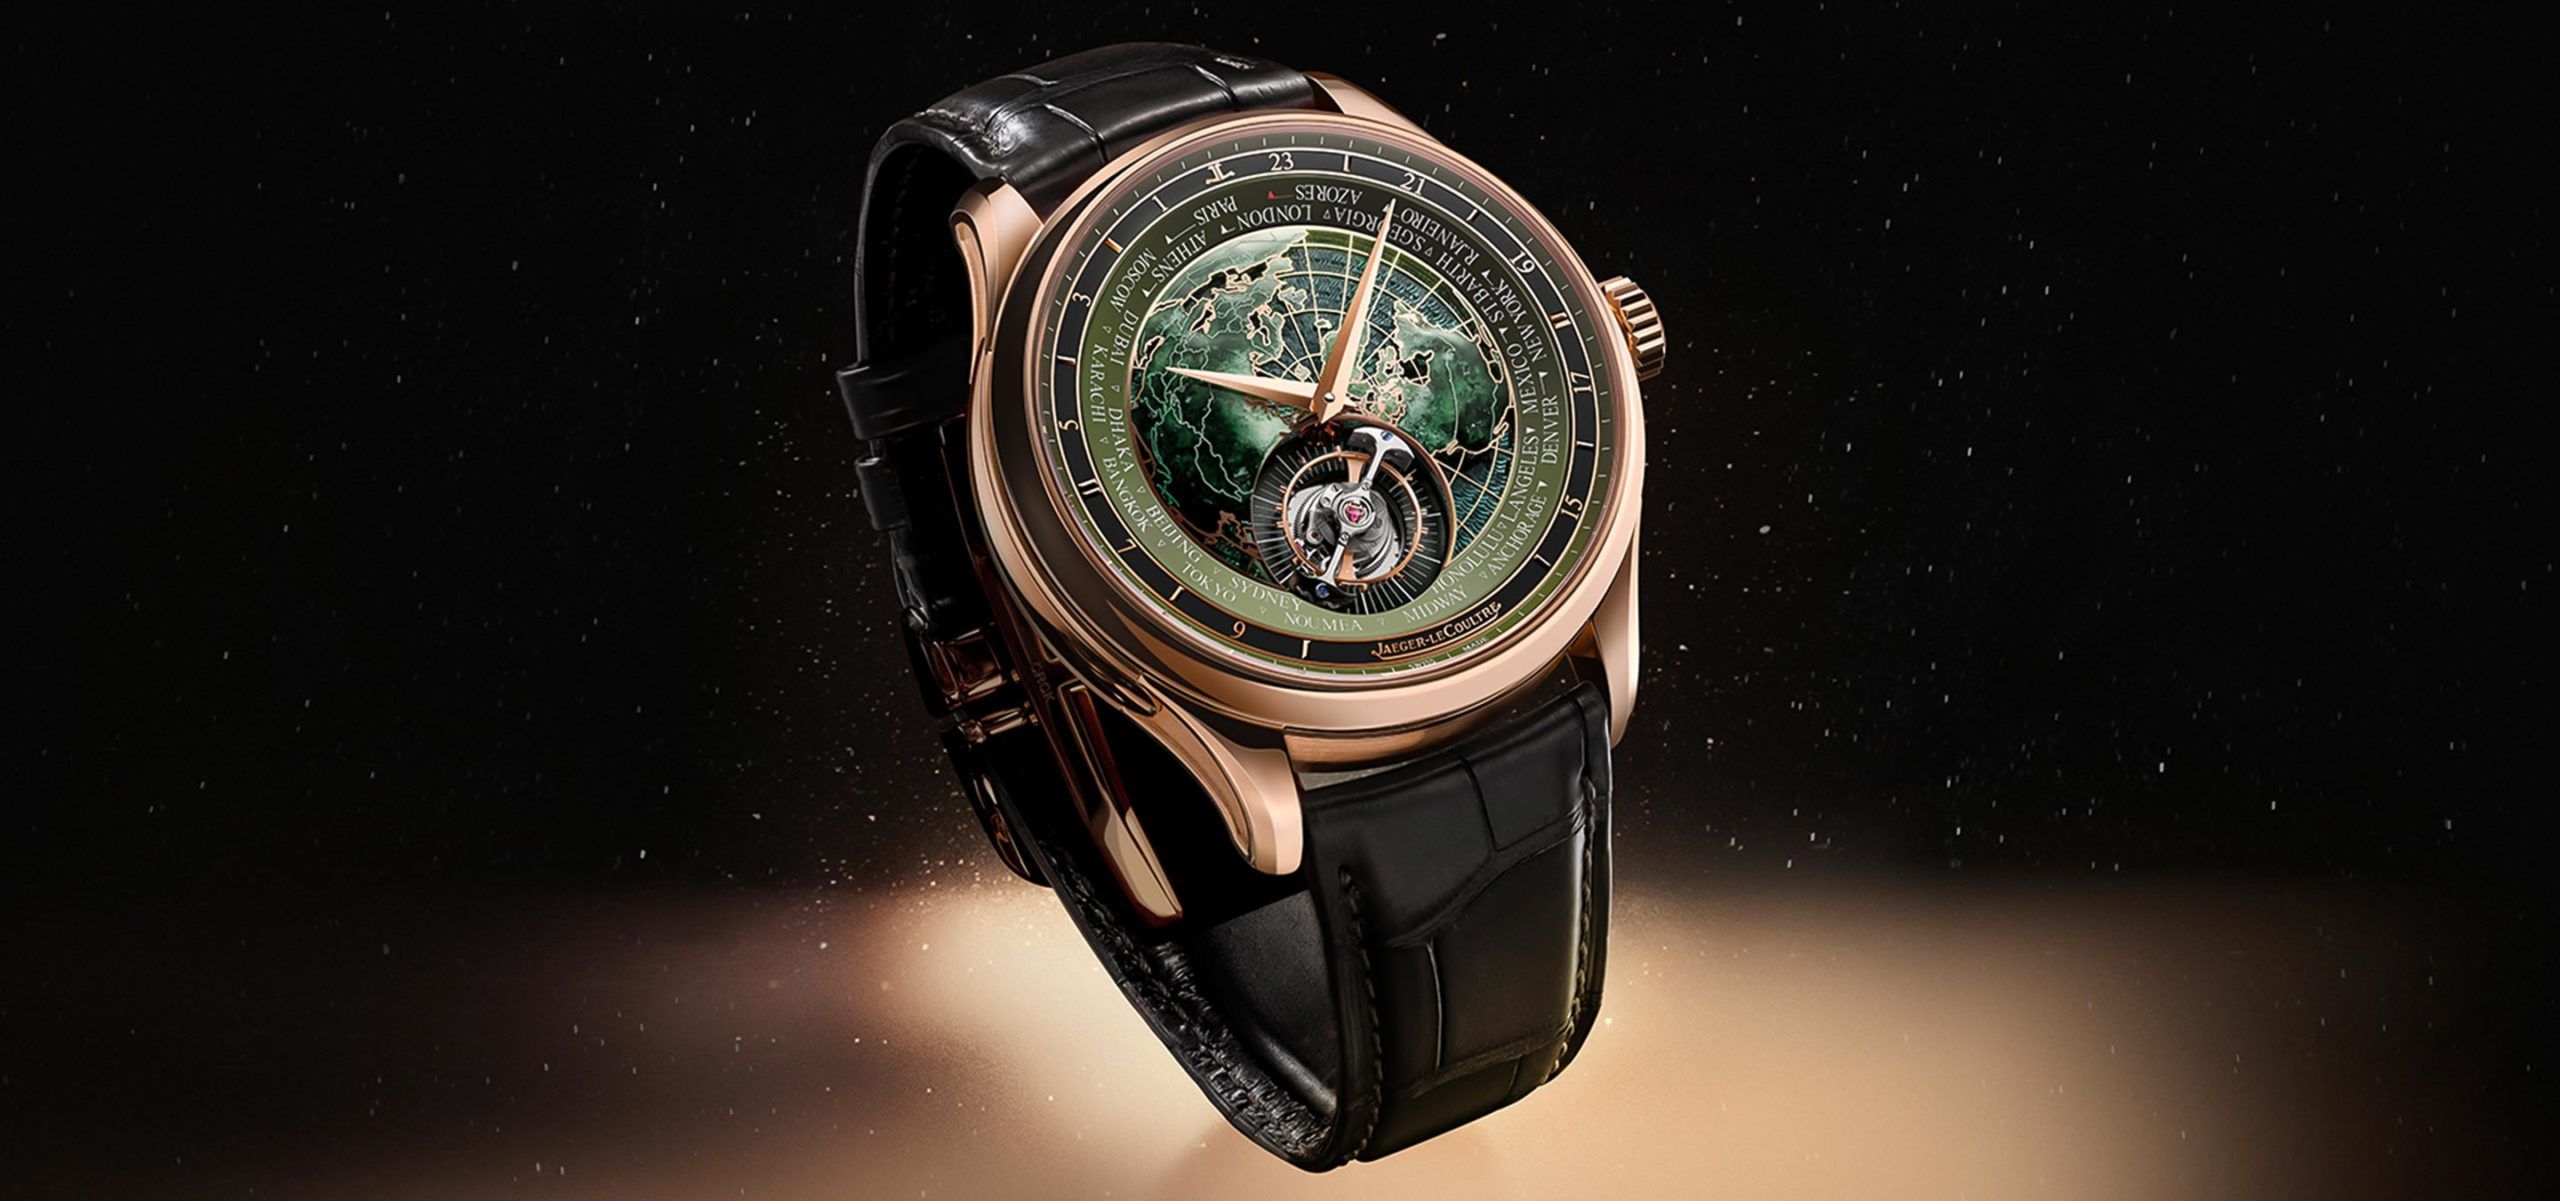 Best Of Both Worlds: Introducing The Jaeger-LeCoultre Master Grande Tradition Calibre 948